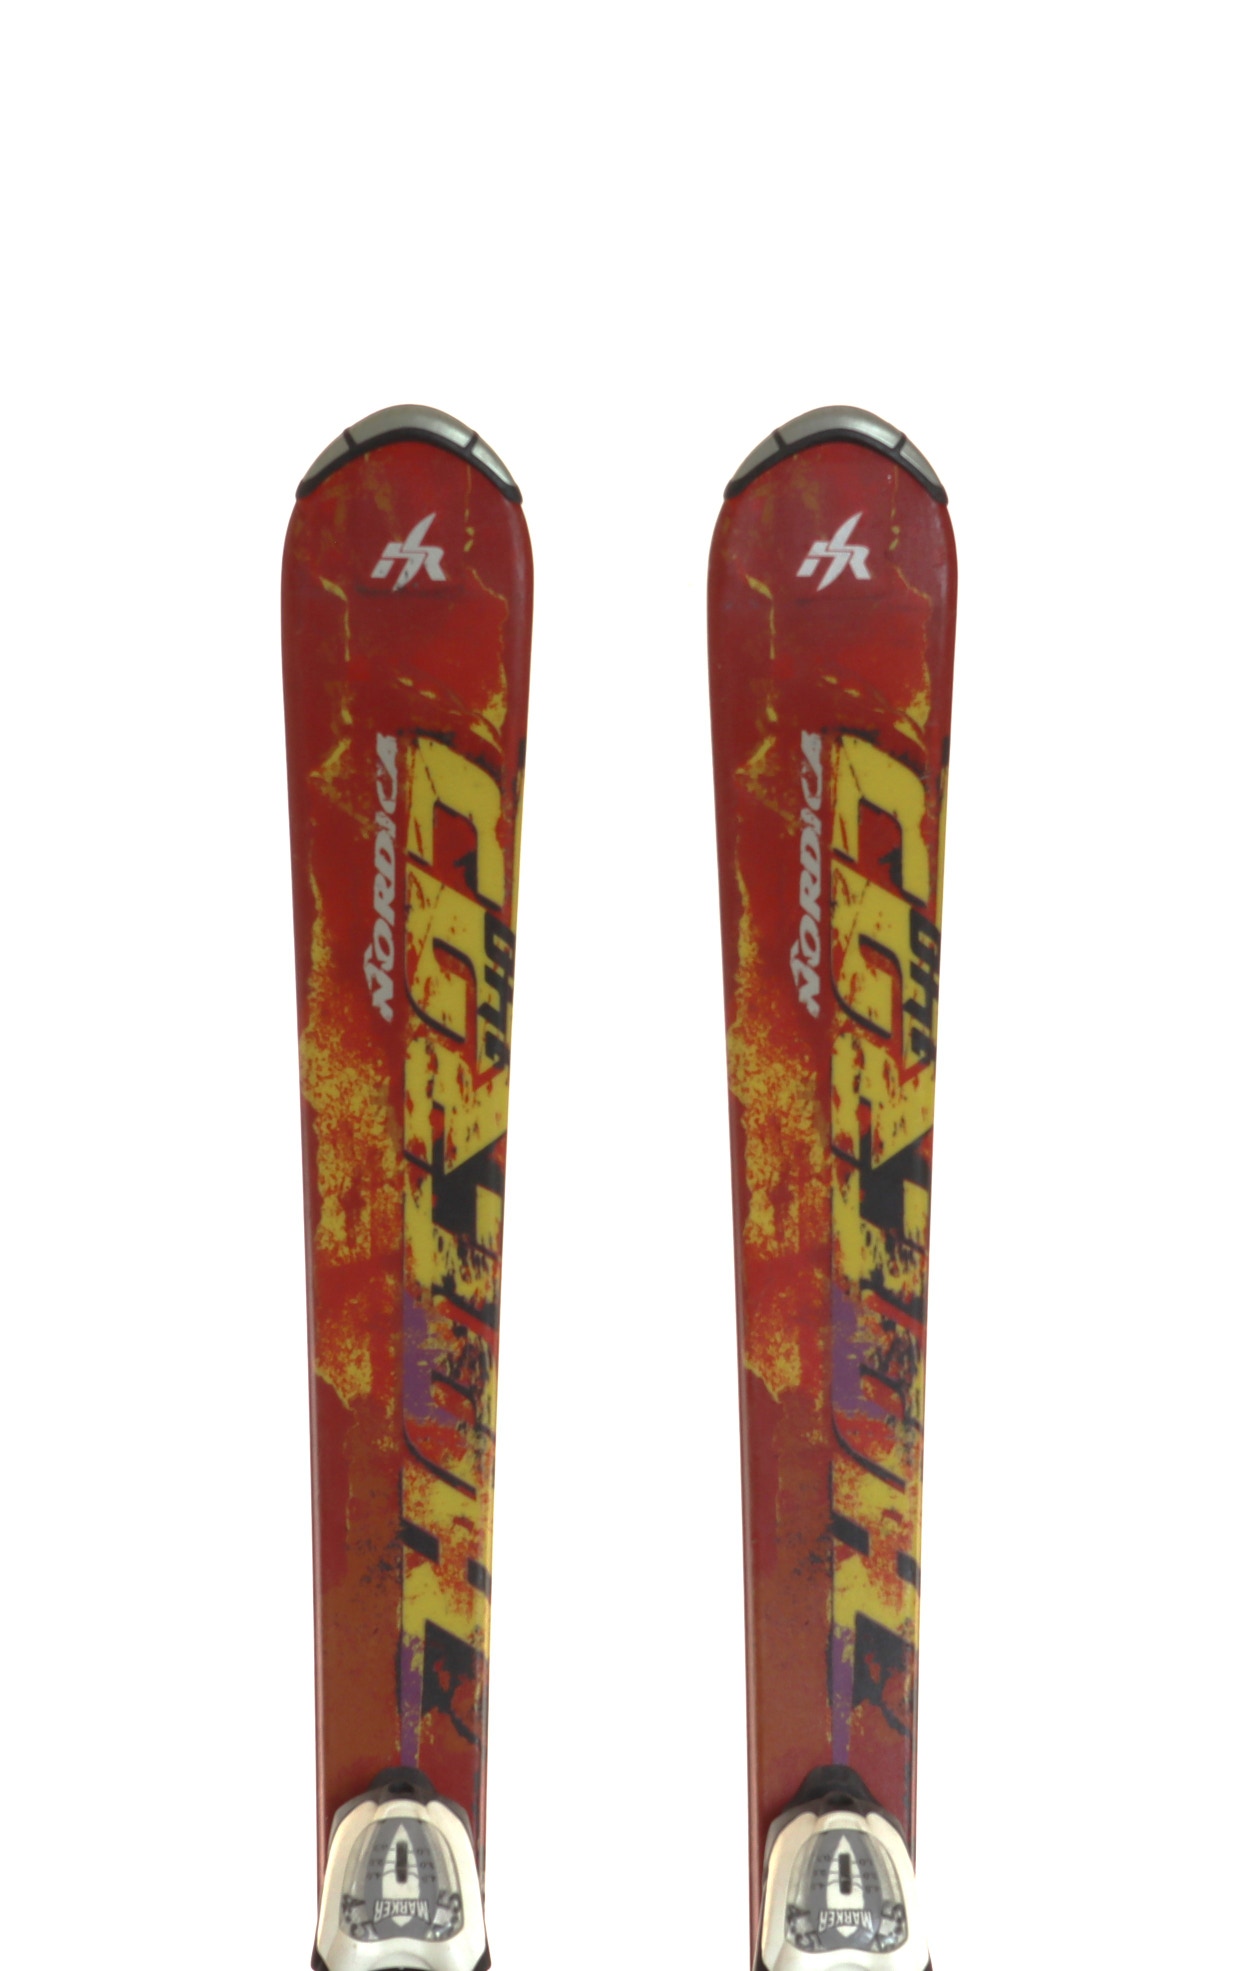 Used 2012 Nordica Hotrod Ski with Marker 4.5 Bindings Size 140 (Option 240098)